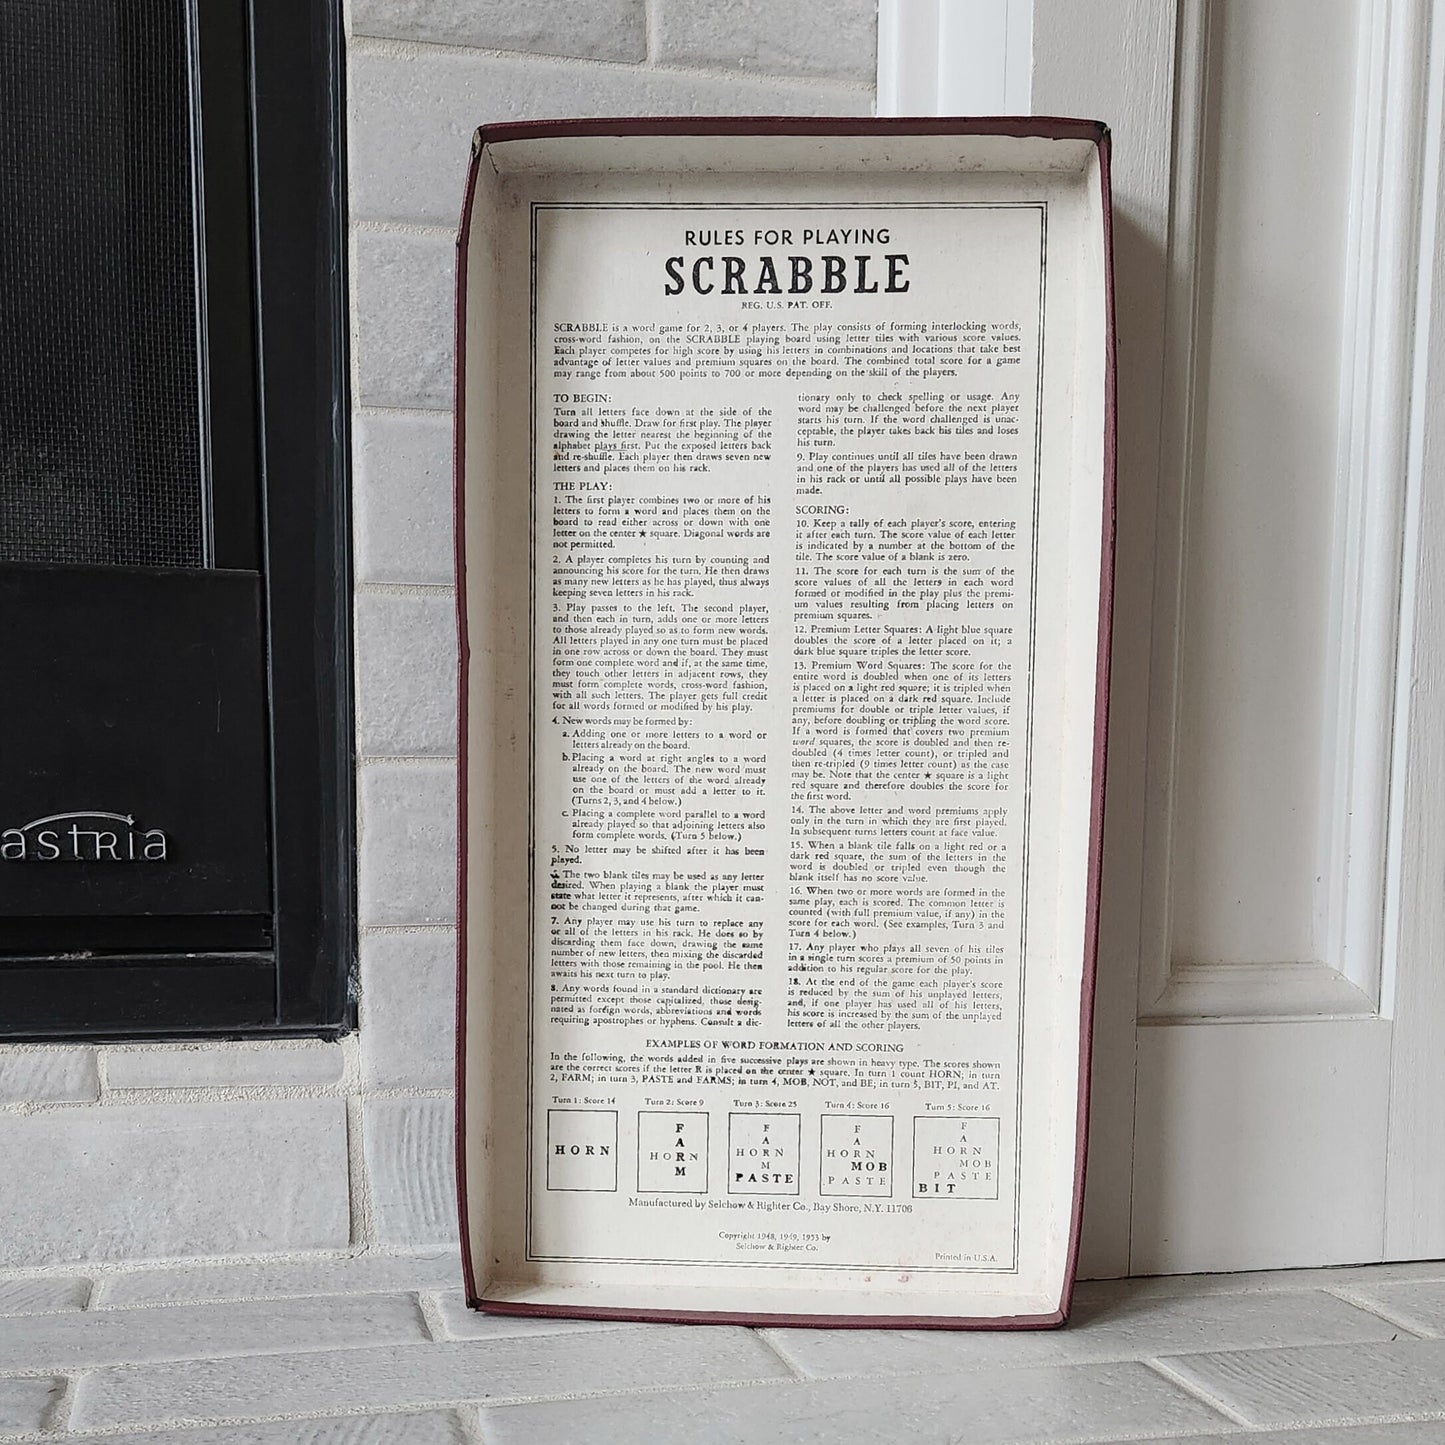 Display and Play 1971 Scrabble Handmade Framed Board Game